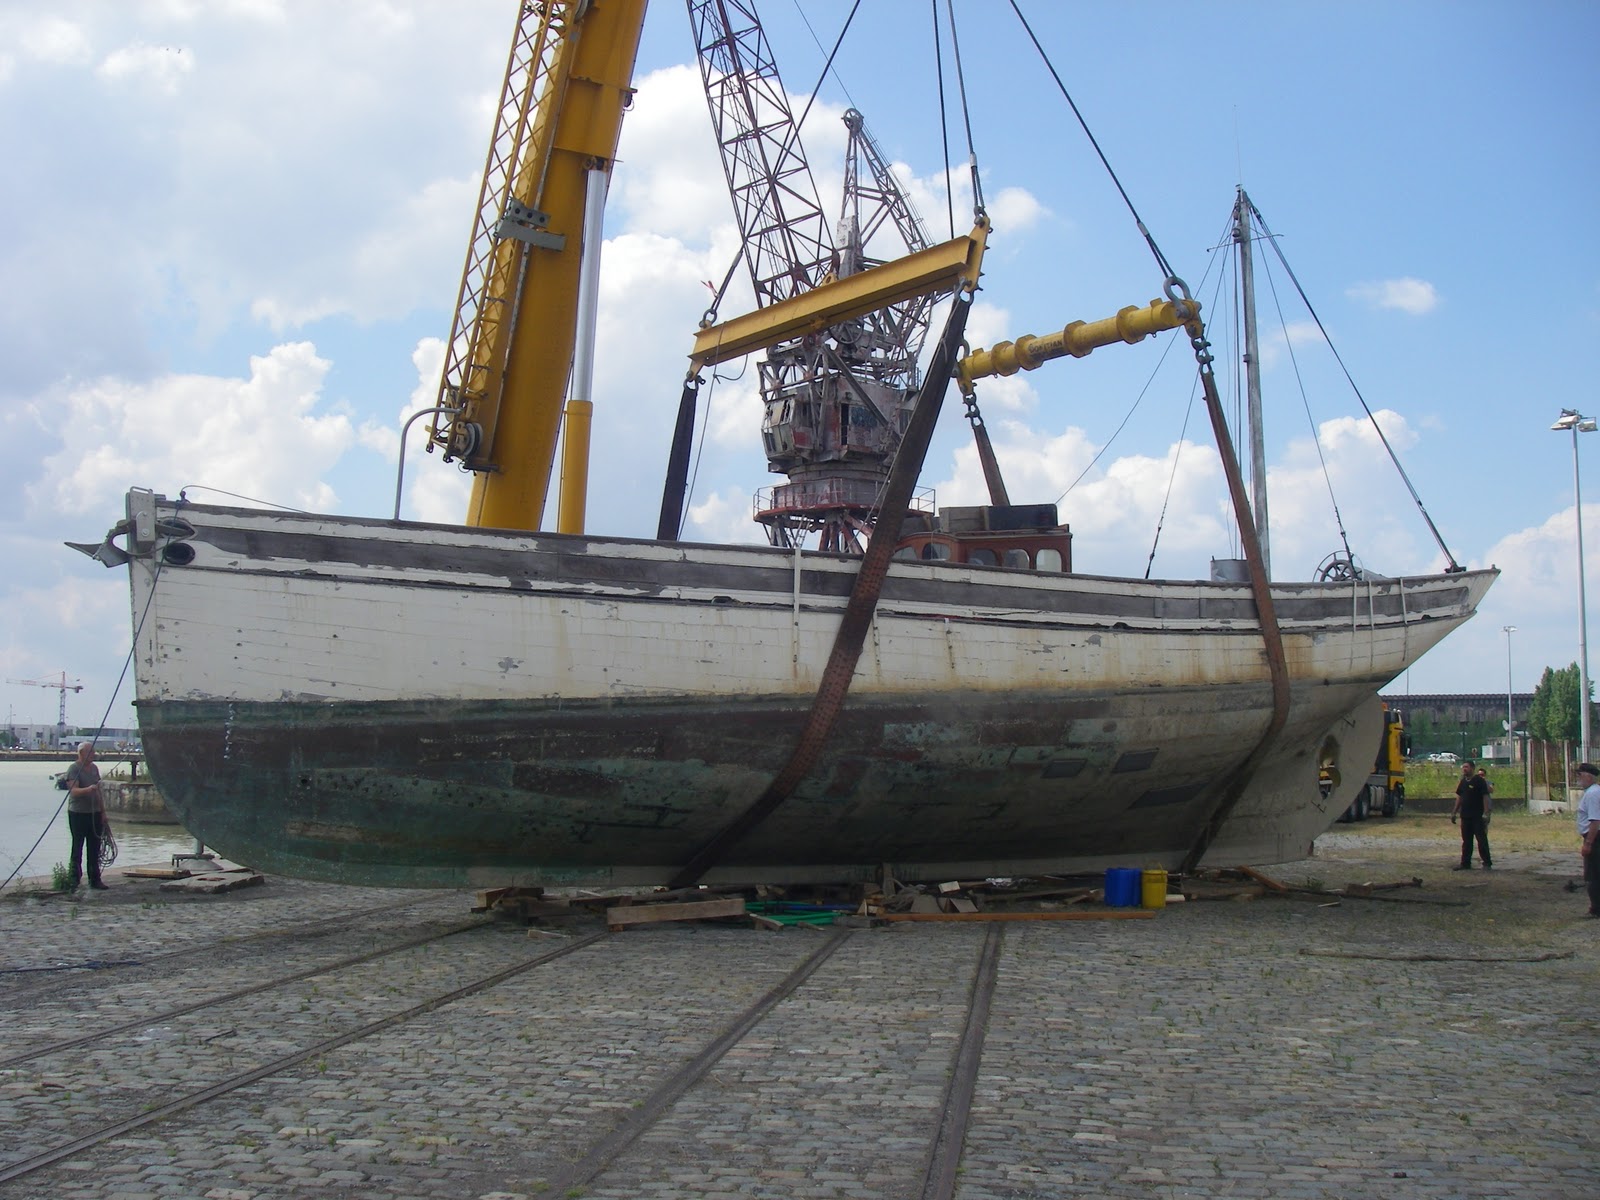 wooden trawler yachts for sale